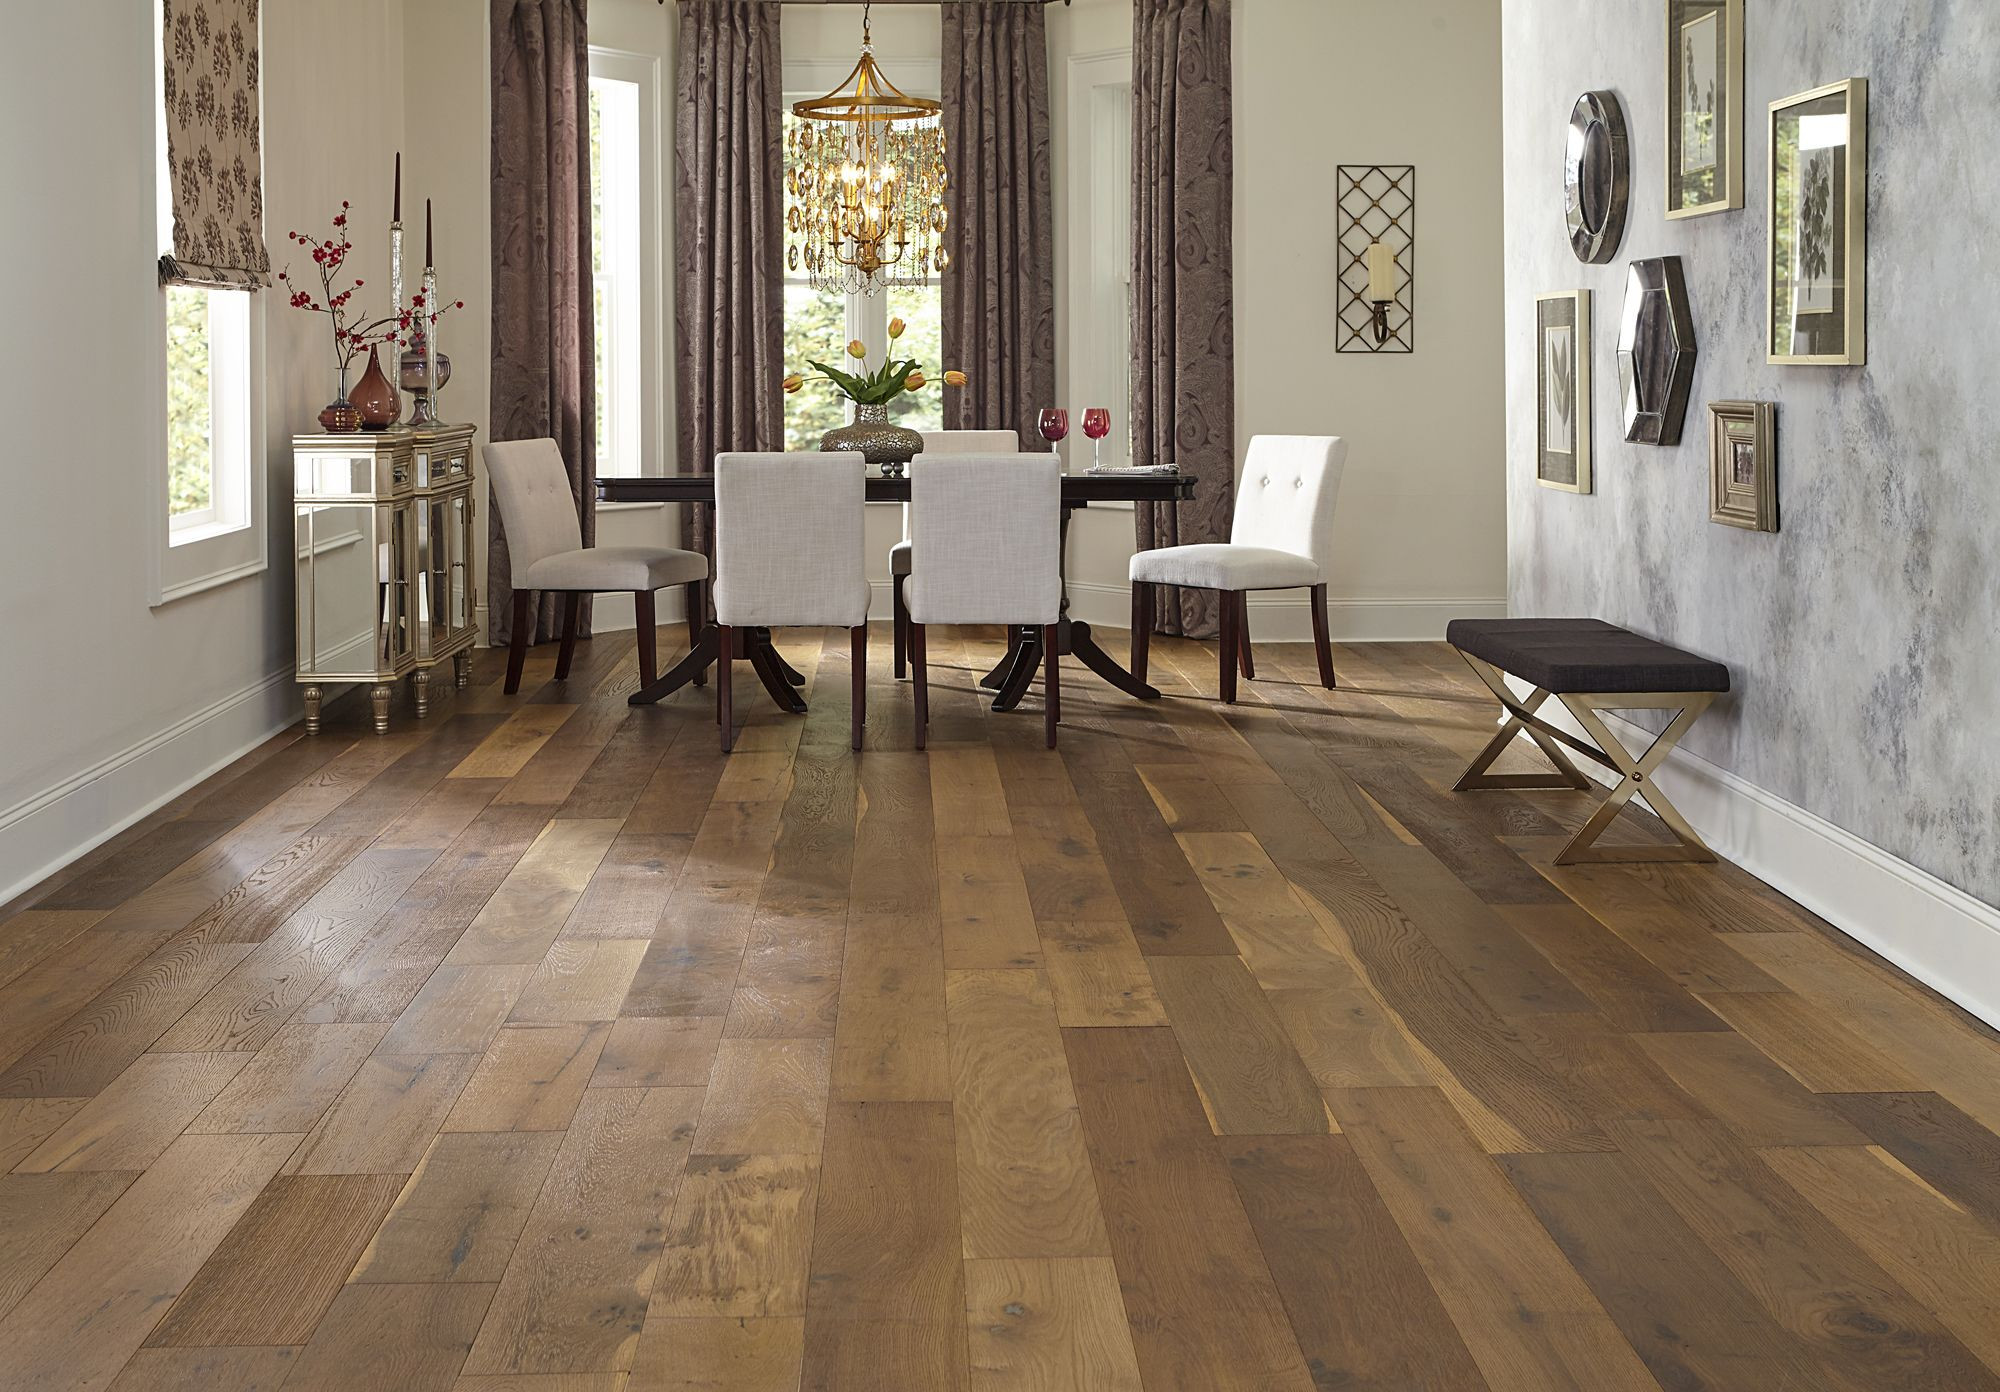 24 Fabulous Diy Engineered Hardwood Floor Installation 2024 free download diy engineered hardwood floor installation of 7 1 2 wide planks and a rustic look bellawood willow manor oak has within 7 1 2 wide planks and a rustic look bellawood willow manor oak has a s